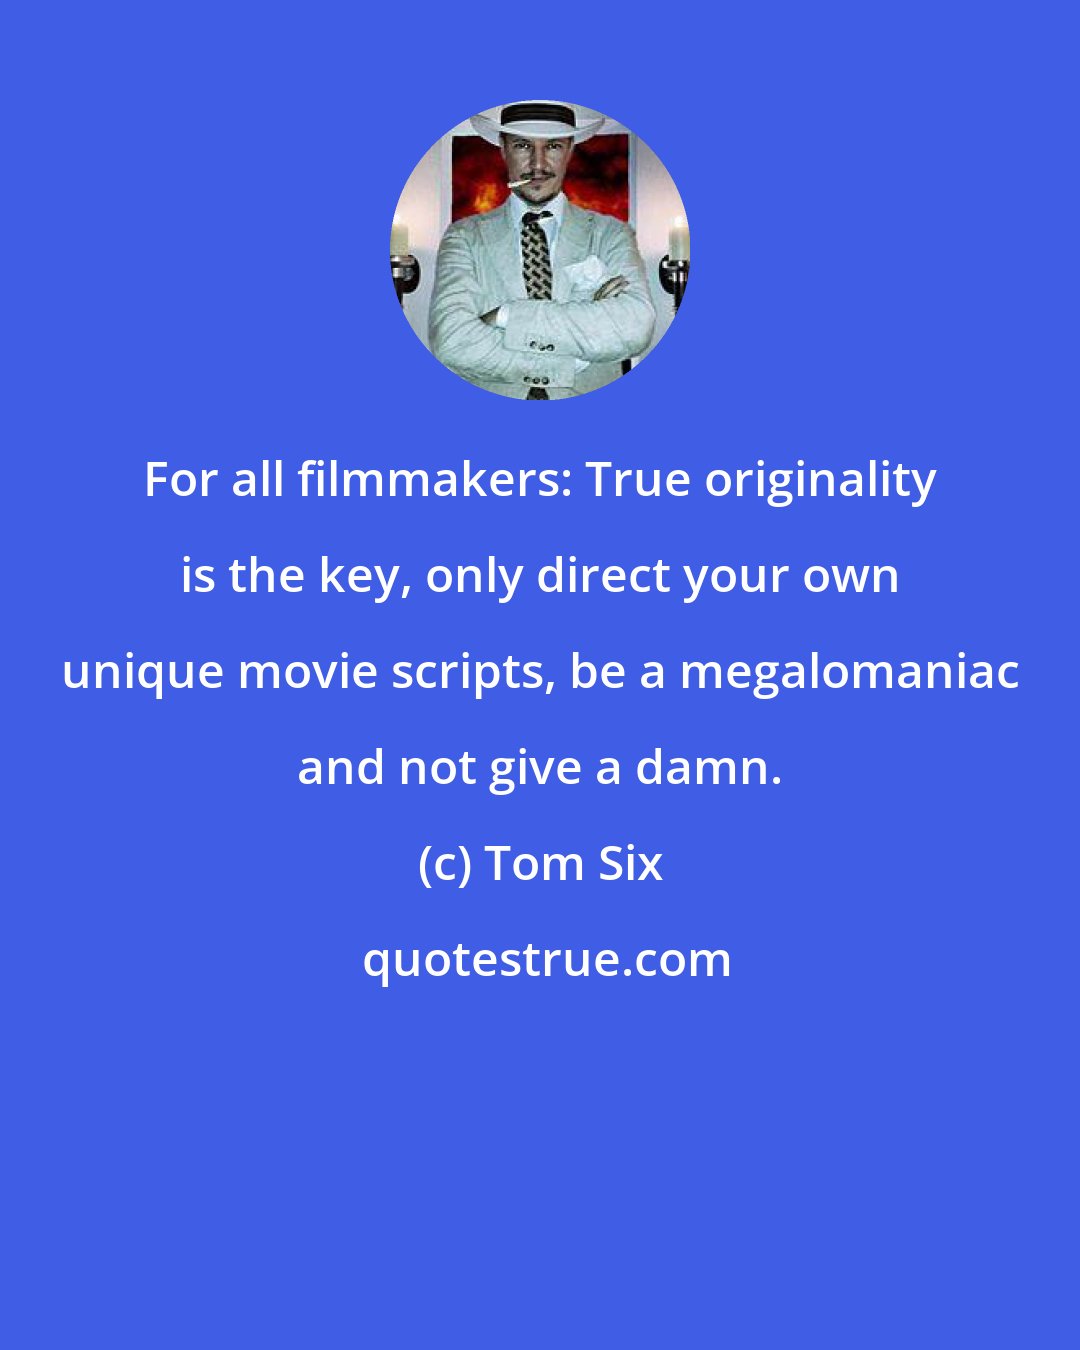 Tom Six: For all filmmakers: True originality is the key, only direct your own unique movie scripts, be a megalomaniac and not give a damn.